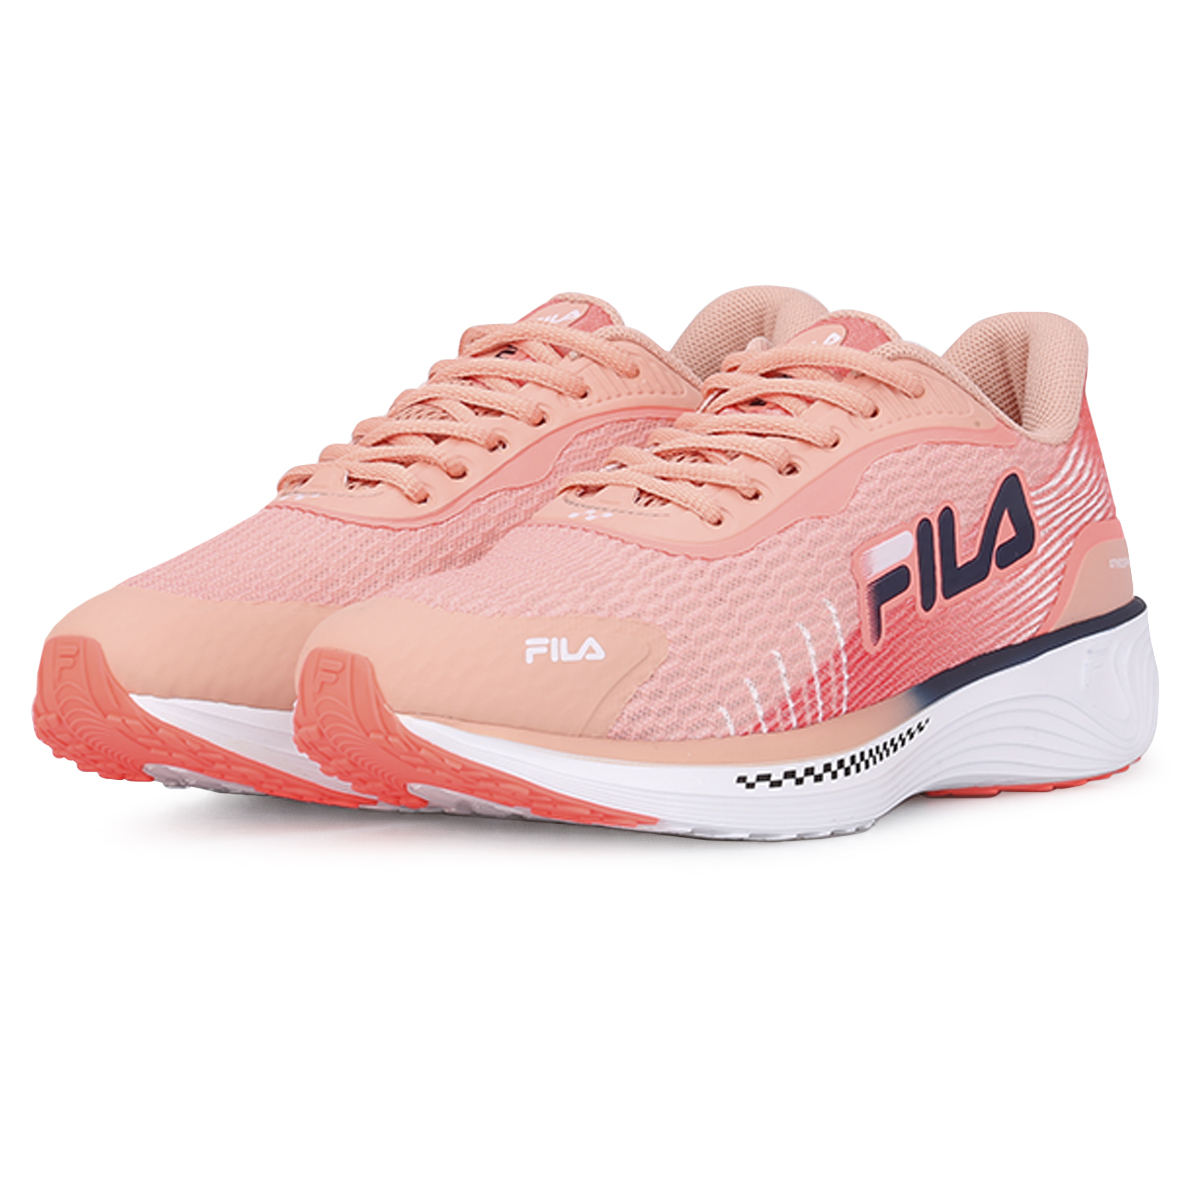 Zapatillas Fila Atmosphere,  image number null